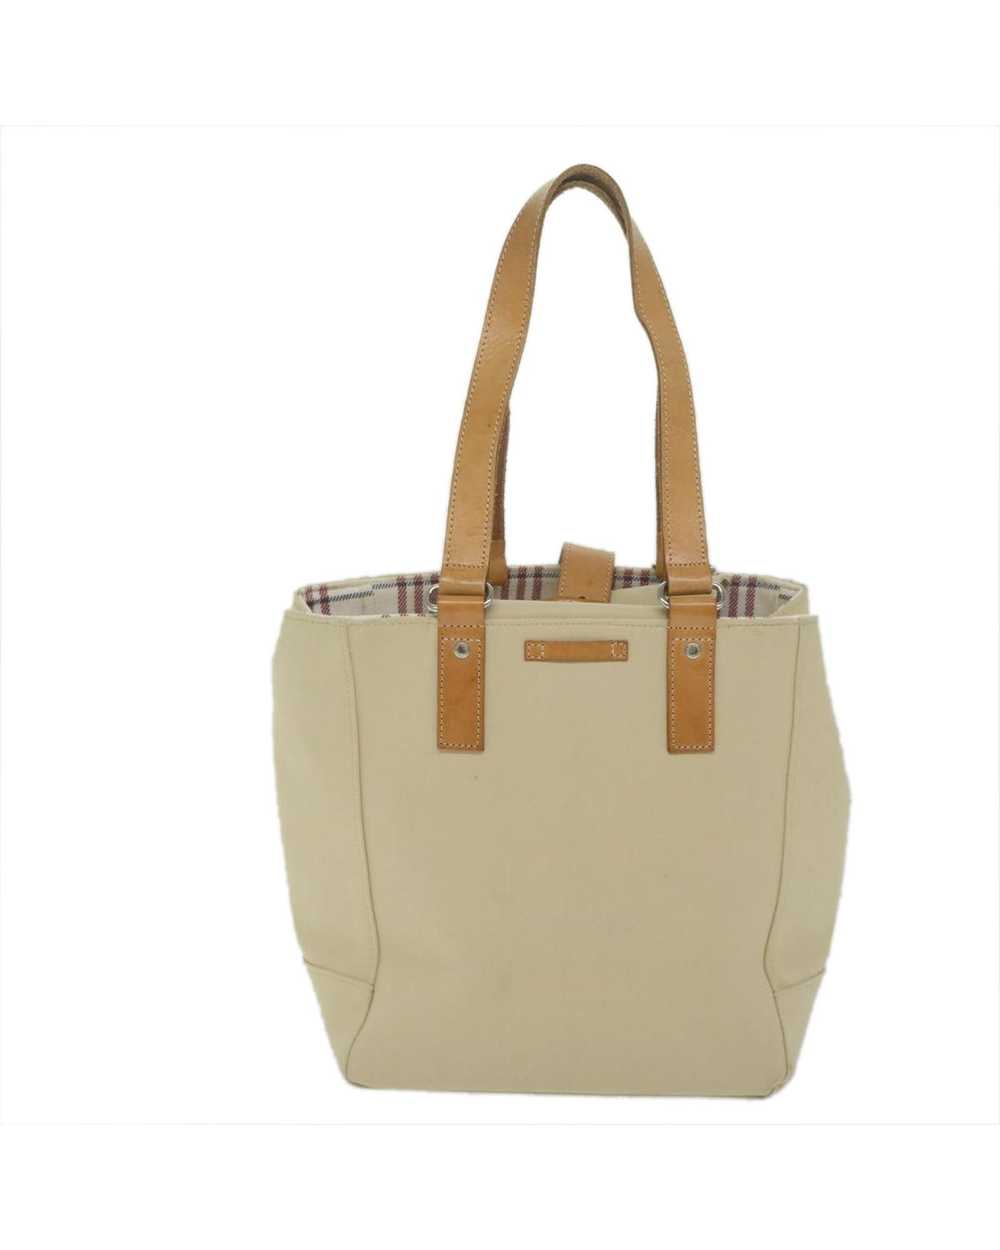 Burberry Classic Beige Canvas Tote Bag - image 3